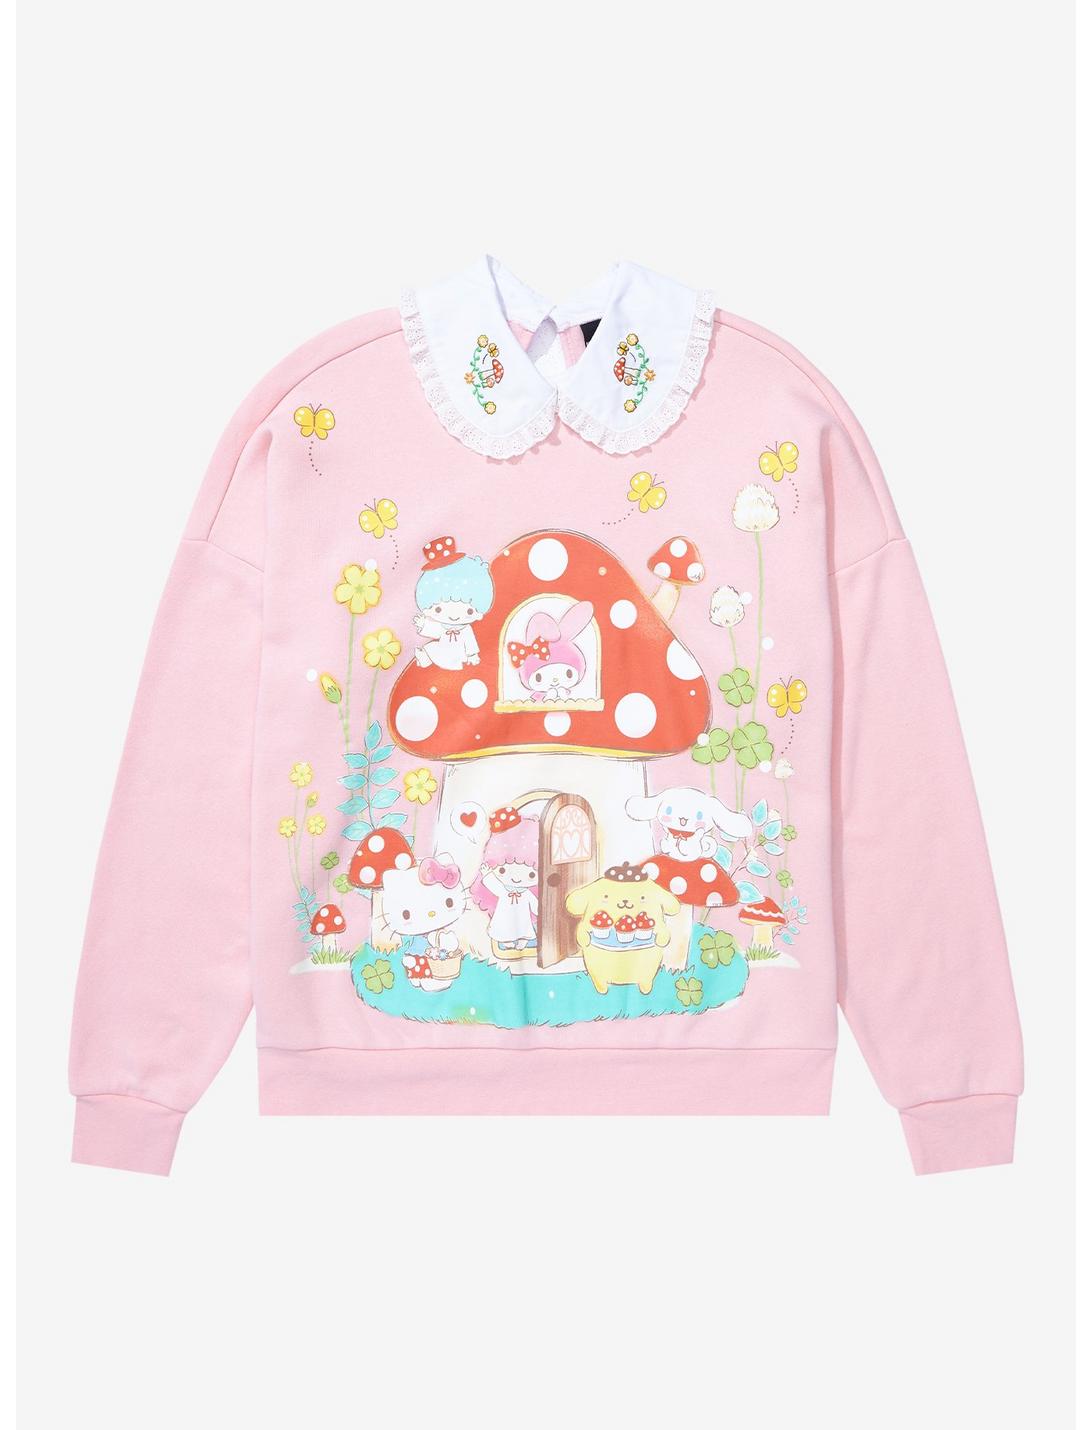 Sanrio Hello Kitty and Friends Mushroom Women's Collared Crewneck - BoxLunch Exclusive, LIGHT PINK, hi-res